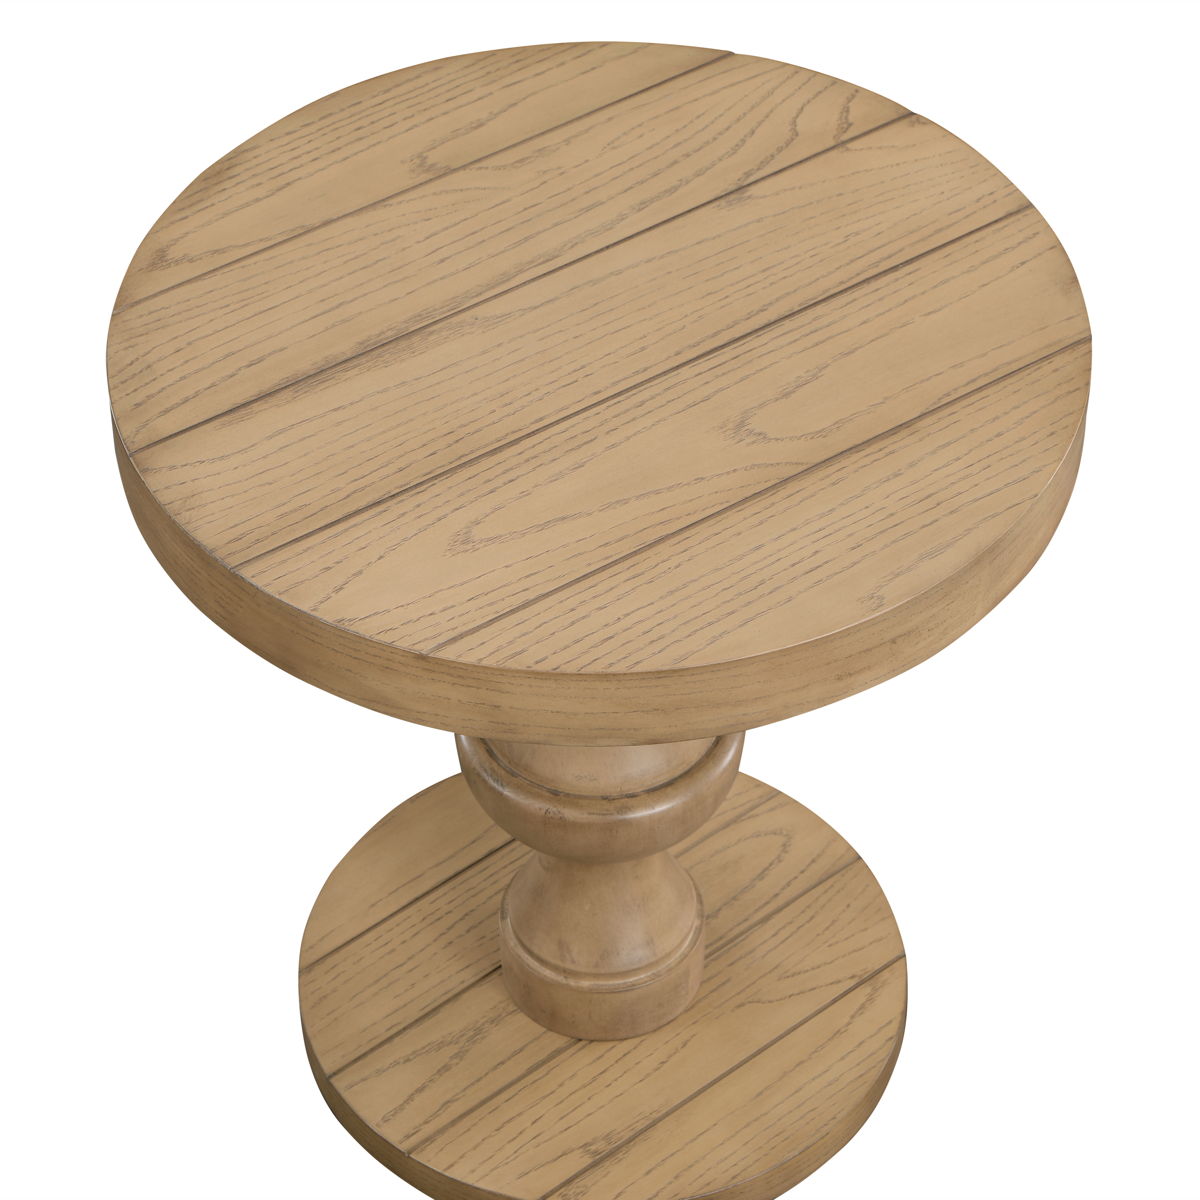 Dory - Round End Table